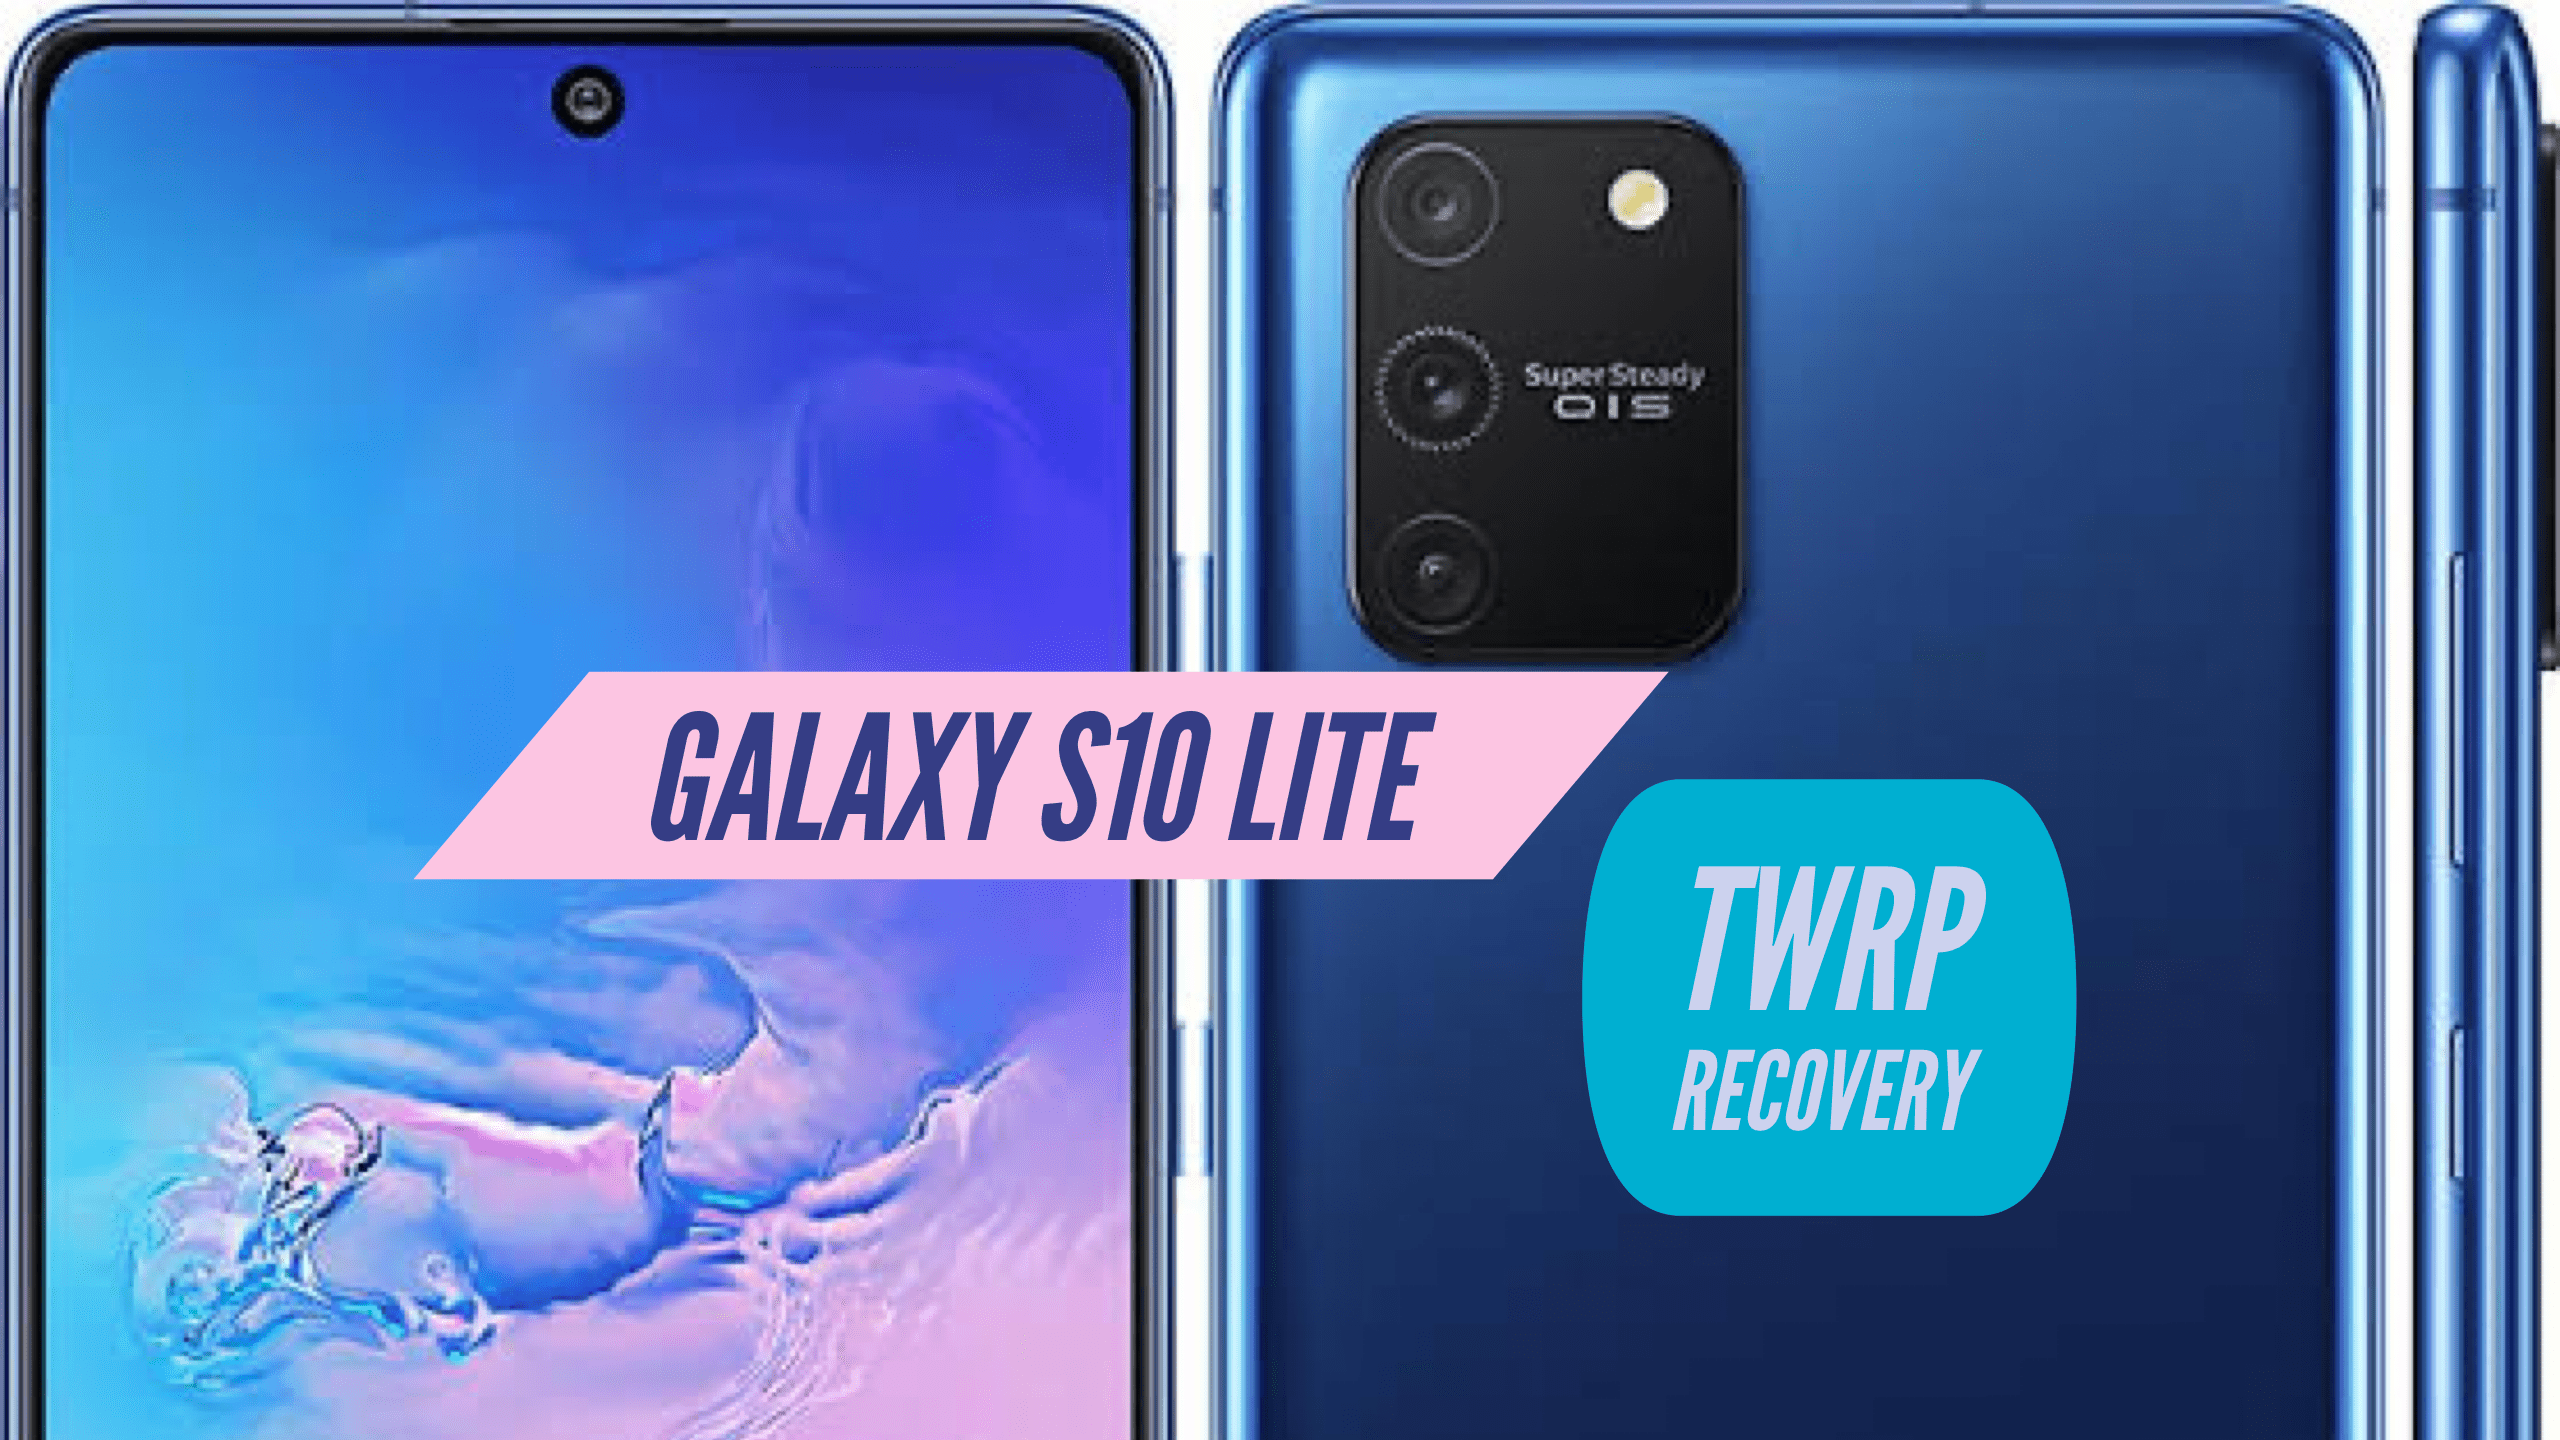 How to Install TWRP Recovery on Galaxy S10 Lite? Two Easy ...